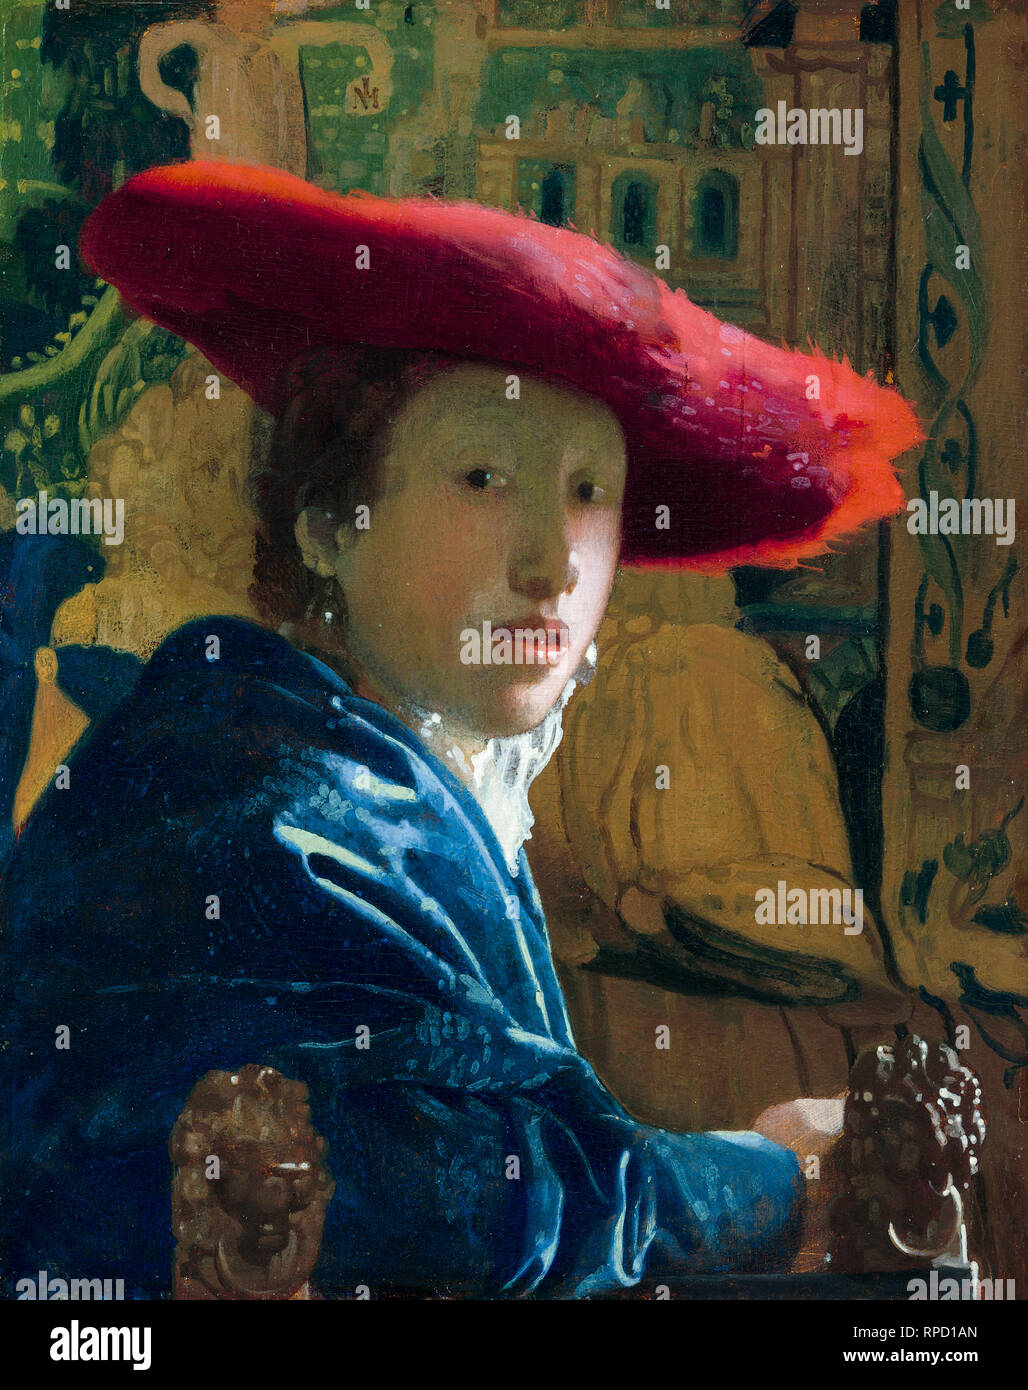 Johannes Vermeer, Girl with the Red Hat, portrait painting, circa 1665 Stock Photo